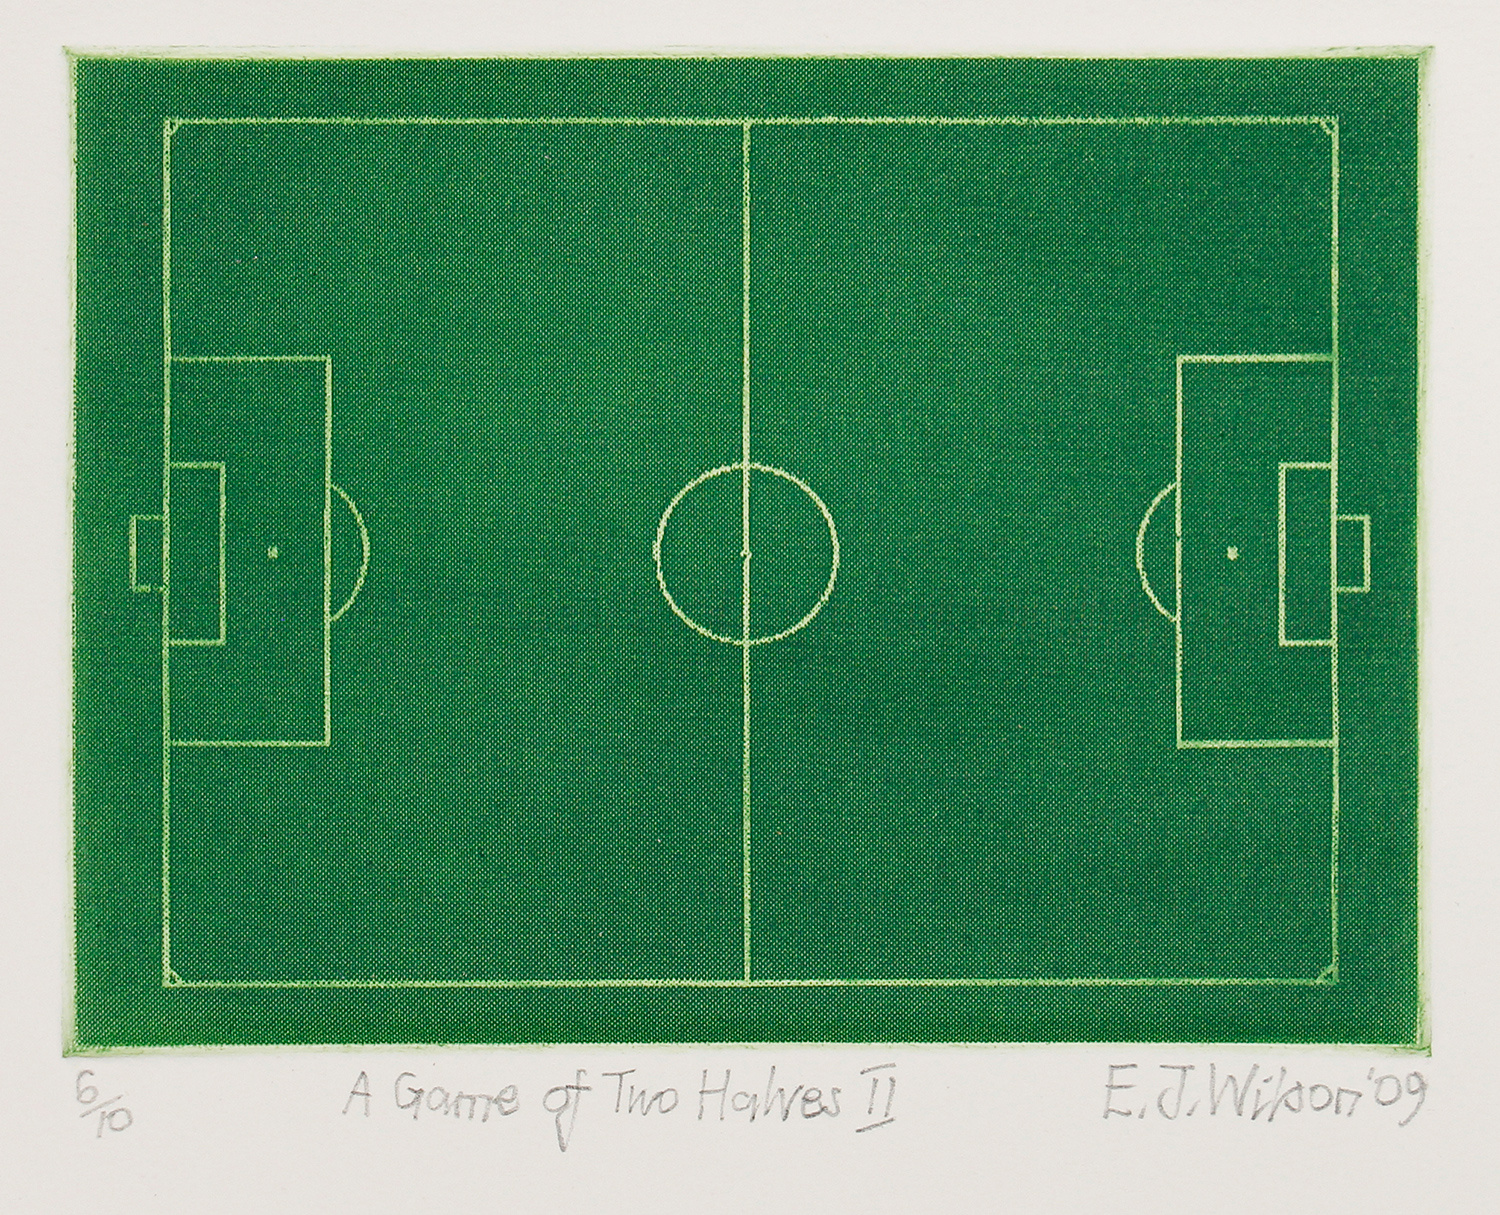 A Game of 2 Halves by Ed Wilson